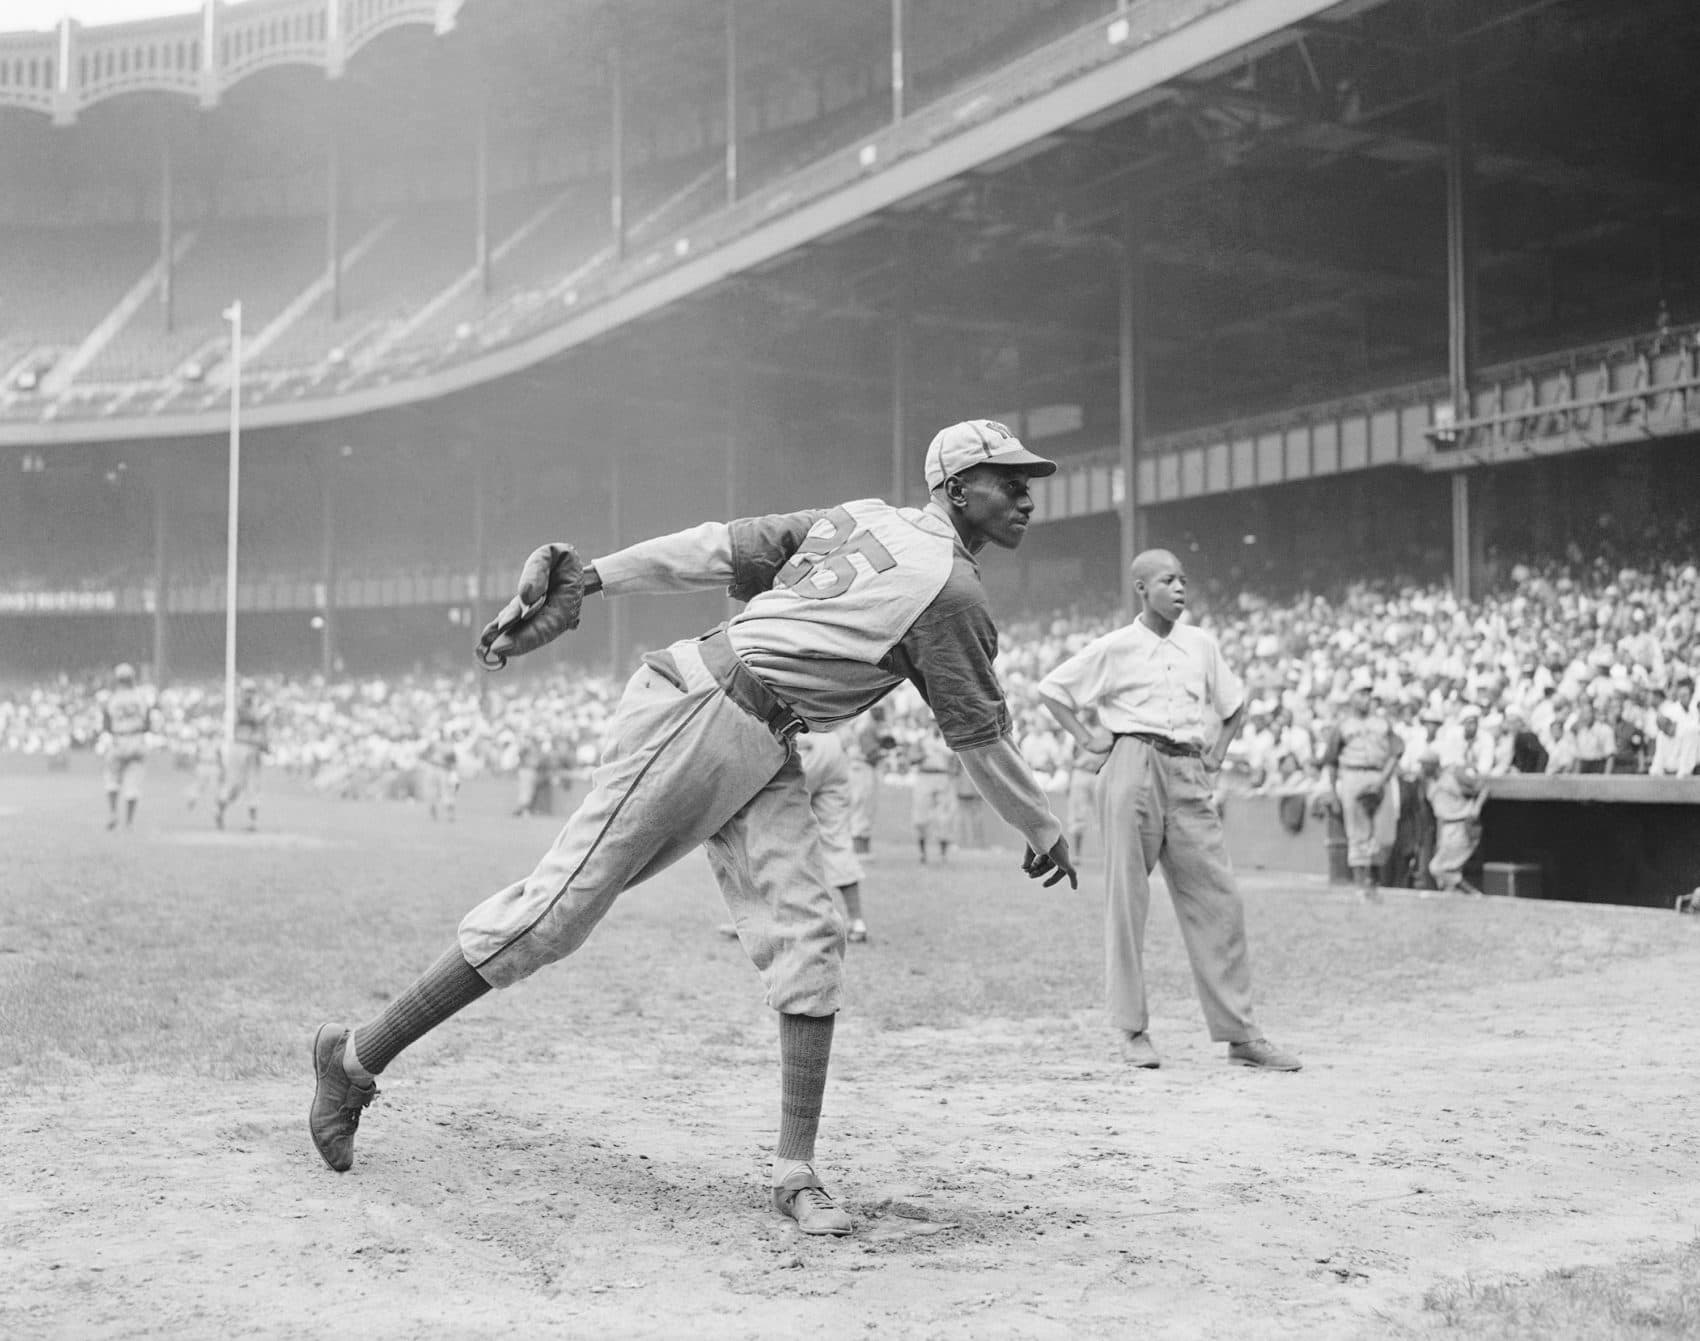 Satchel Paige, The House Of David, And A Decades-Old Mystery